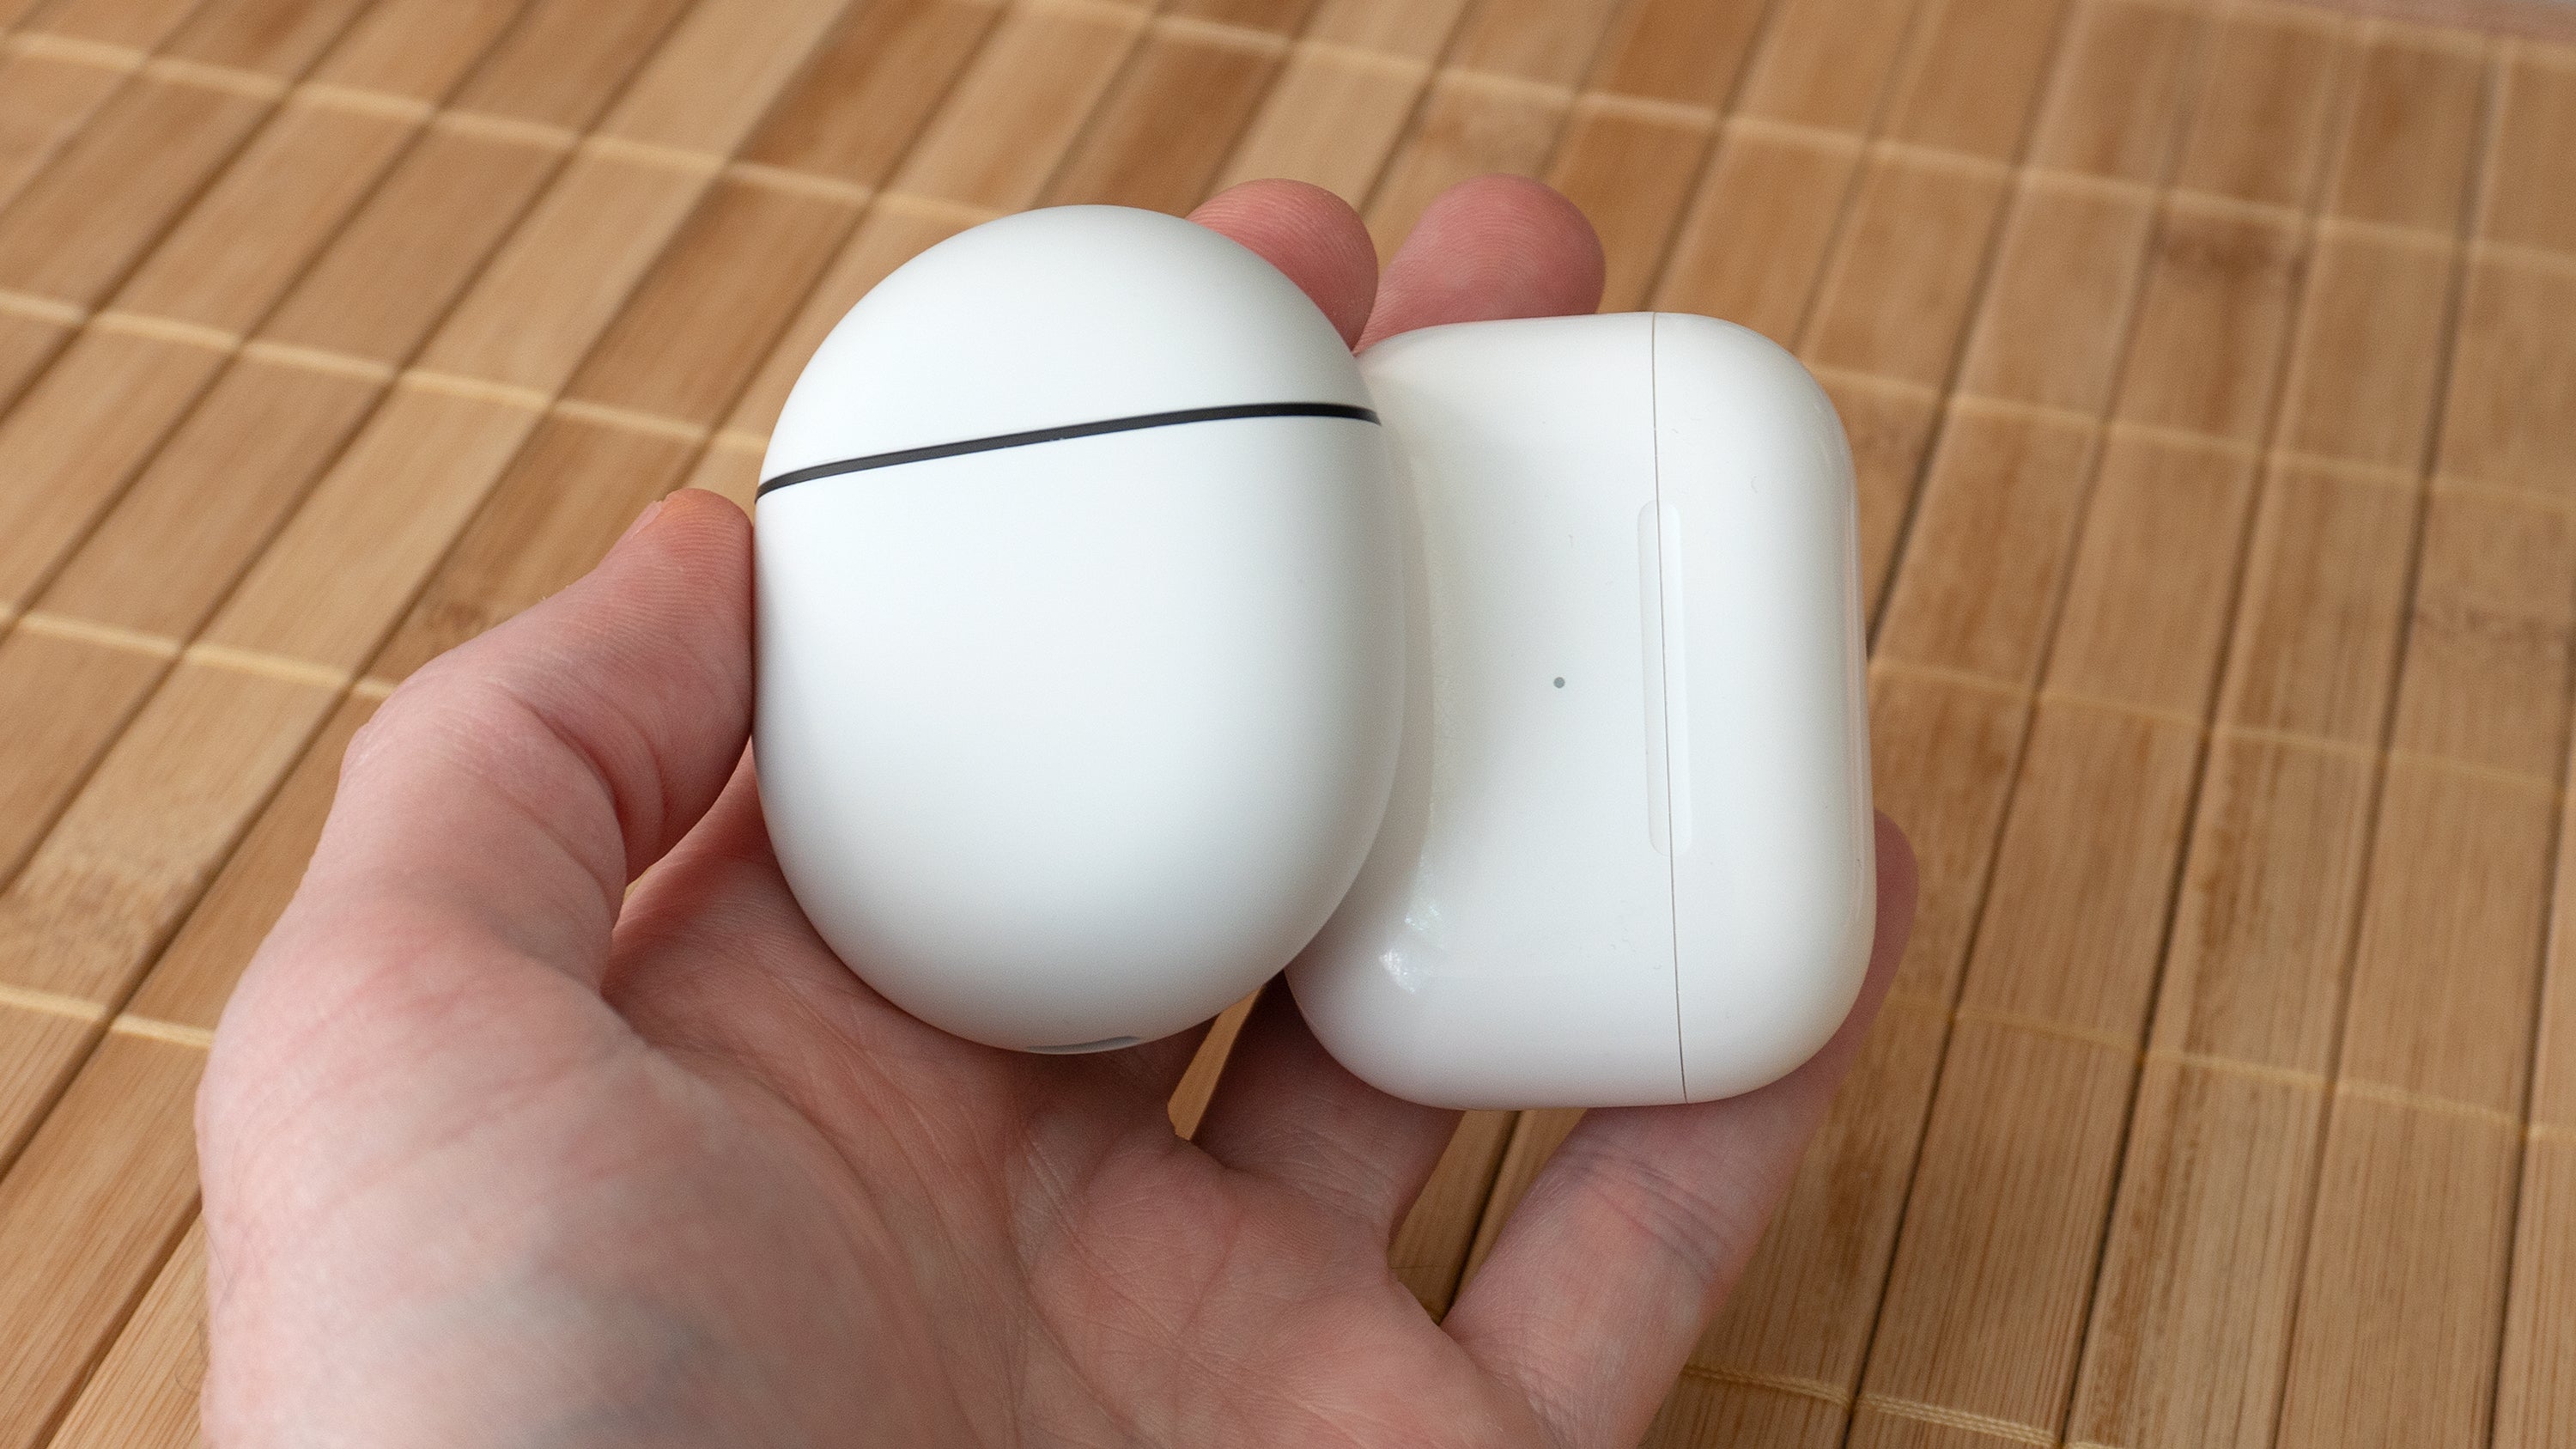 The Pixel Buds Pro charging case (left) next to the AirPods Pro charging case (right). (Photo: Andrew Liszewski | Gizmodo)